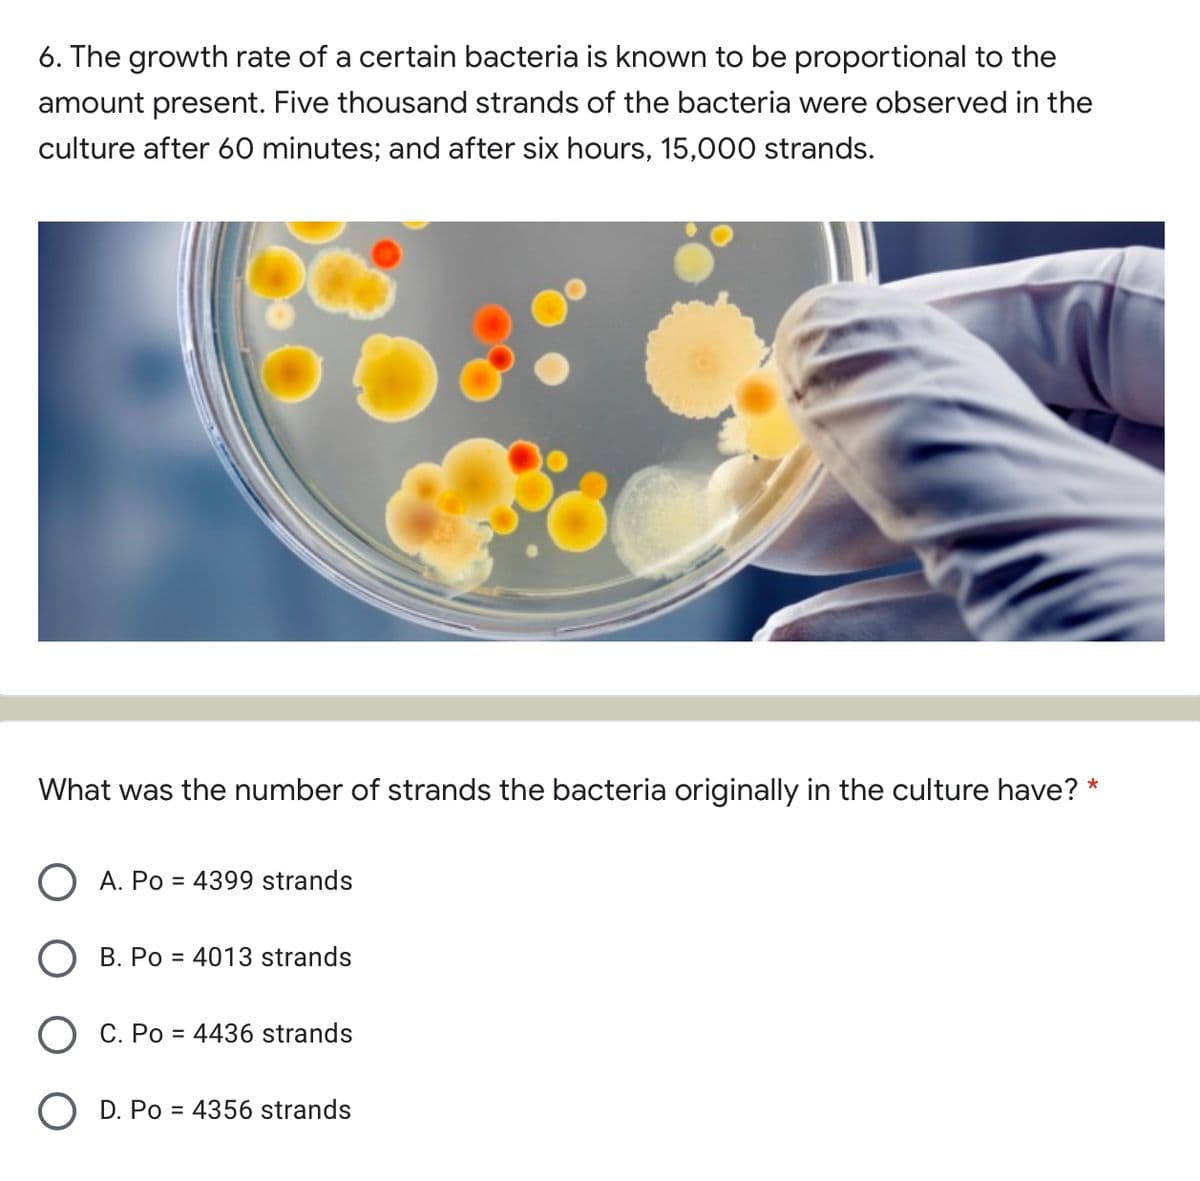 6. The growth rate of a certain bacteria is known to be proportional to the
amount present. Five thousand strands of the bacteria were observed in the
culture after 60 minutes; and after six hours, 15,000 strands.
What was the number of strands the bacteria originally in the culture have?
O A. Po = 4399 strands
B. Po = 4013 strands
O C. Po = 4436 strands
O D. Po = 4356 strands
